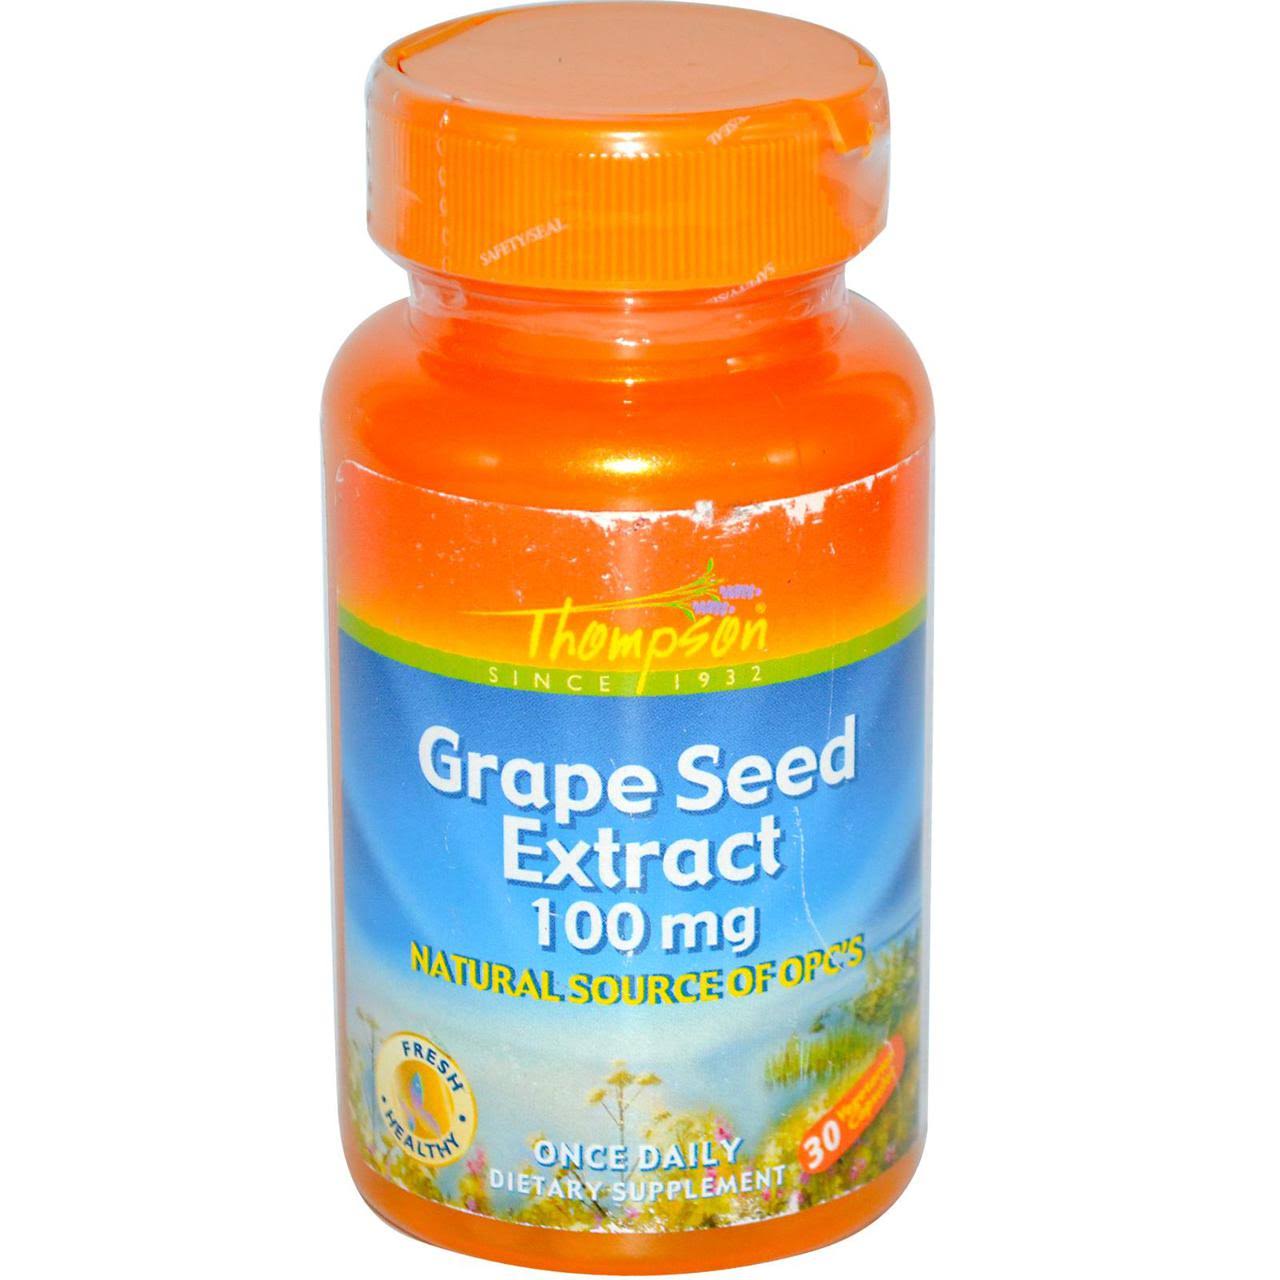 Thompson Grape Seed Extract Dietary Supplement - 100mg, 30ct